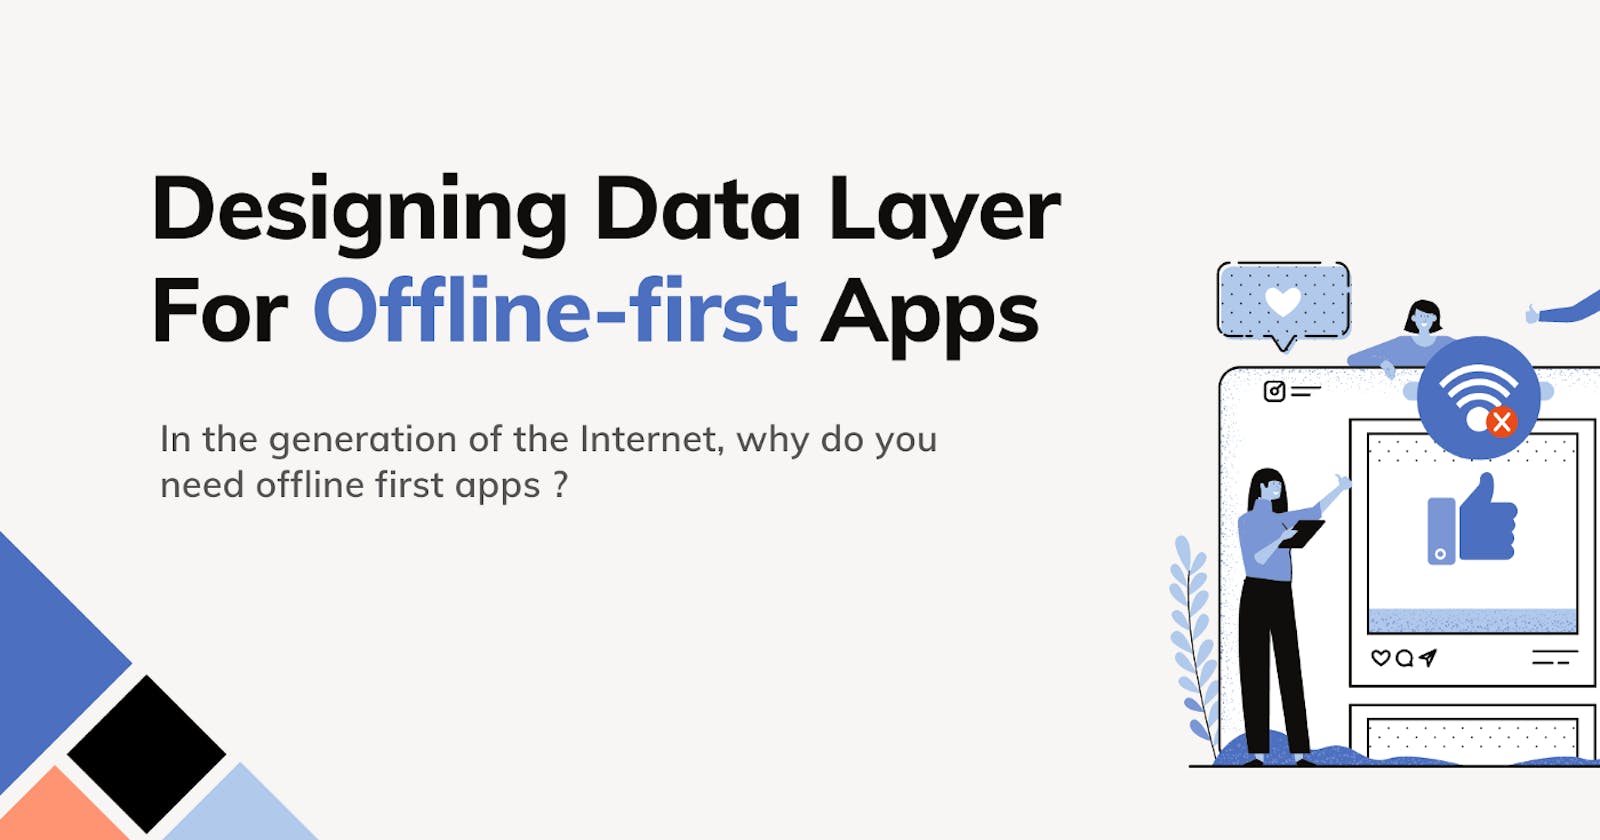 iOS — Designing Data Layer For Offline-first Apps